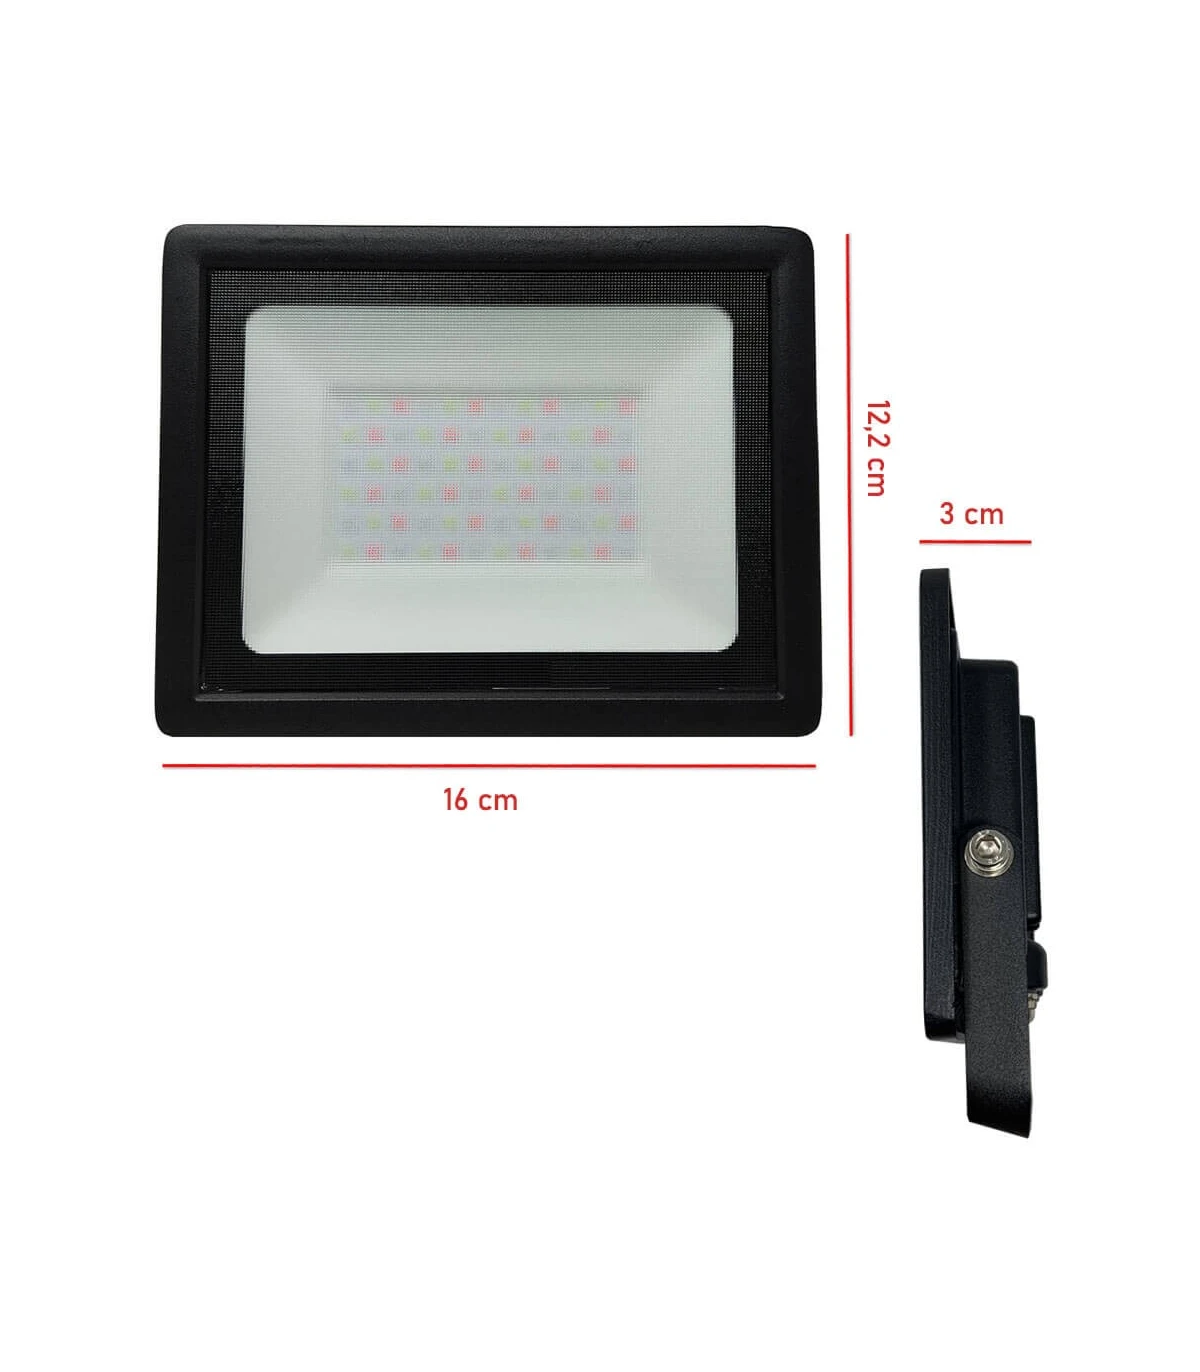 Foco proyector LED exterior RGBW 30W IP65